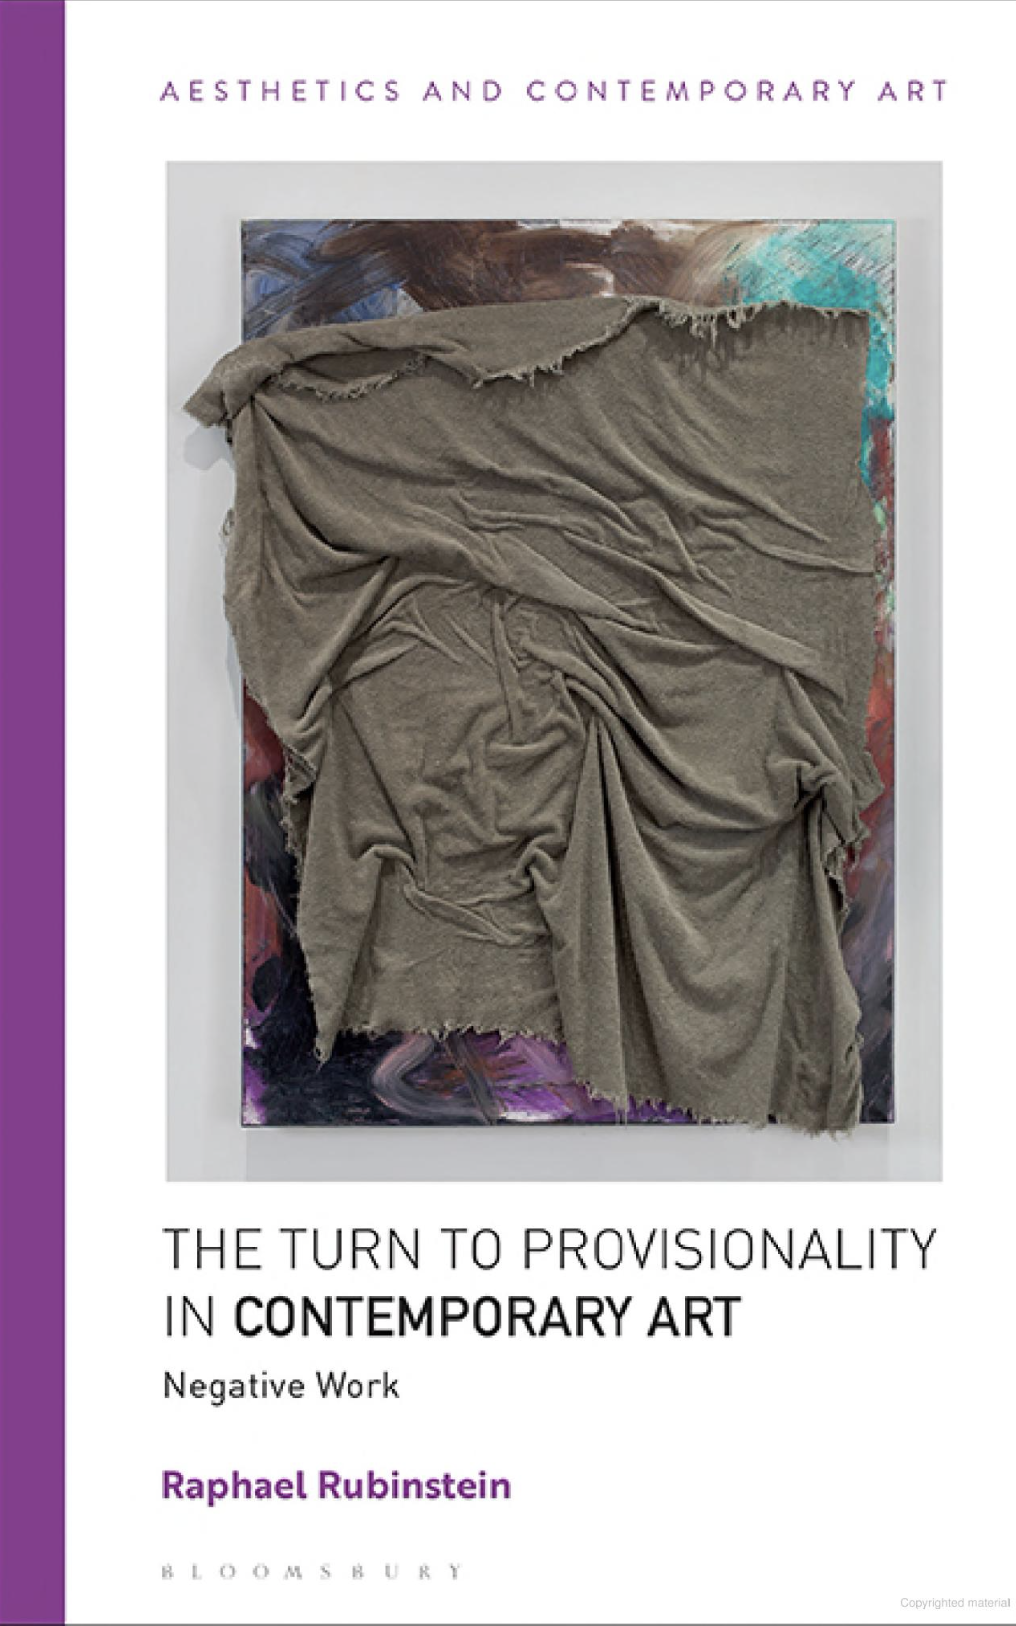 The Turn to Provisionality in Contemporary Art Negative Work by Raphael Rubinstein